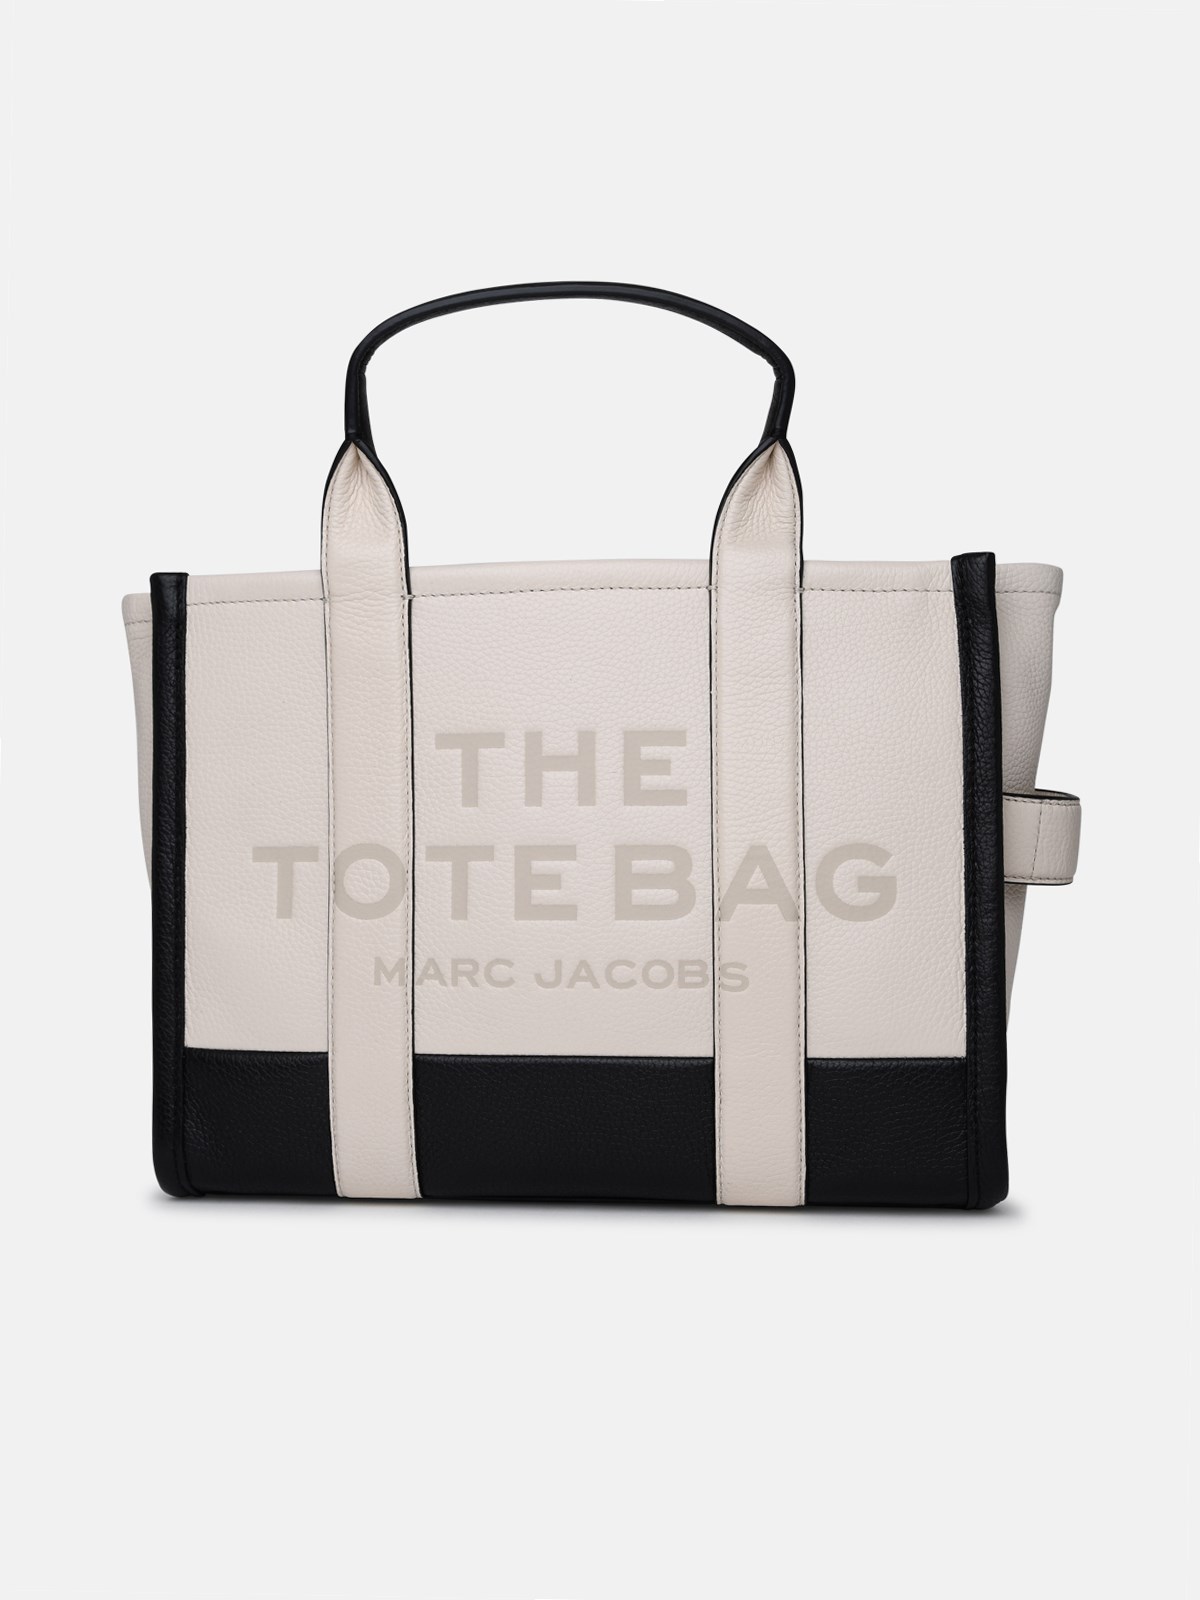 Marc Jacobs (the) Borsa Tote Bicolor In Ivory